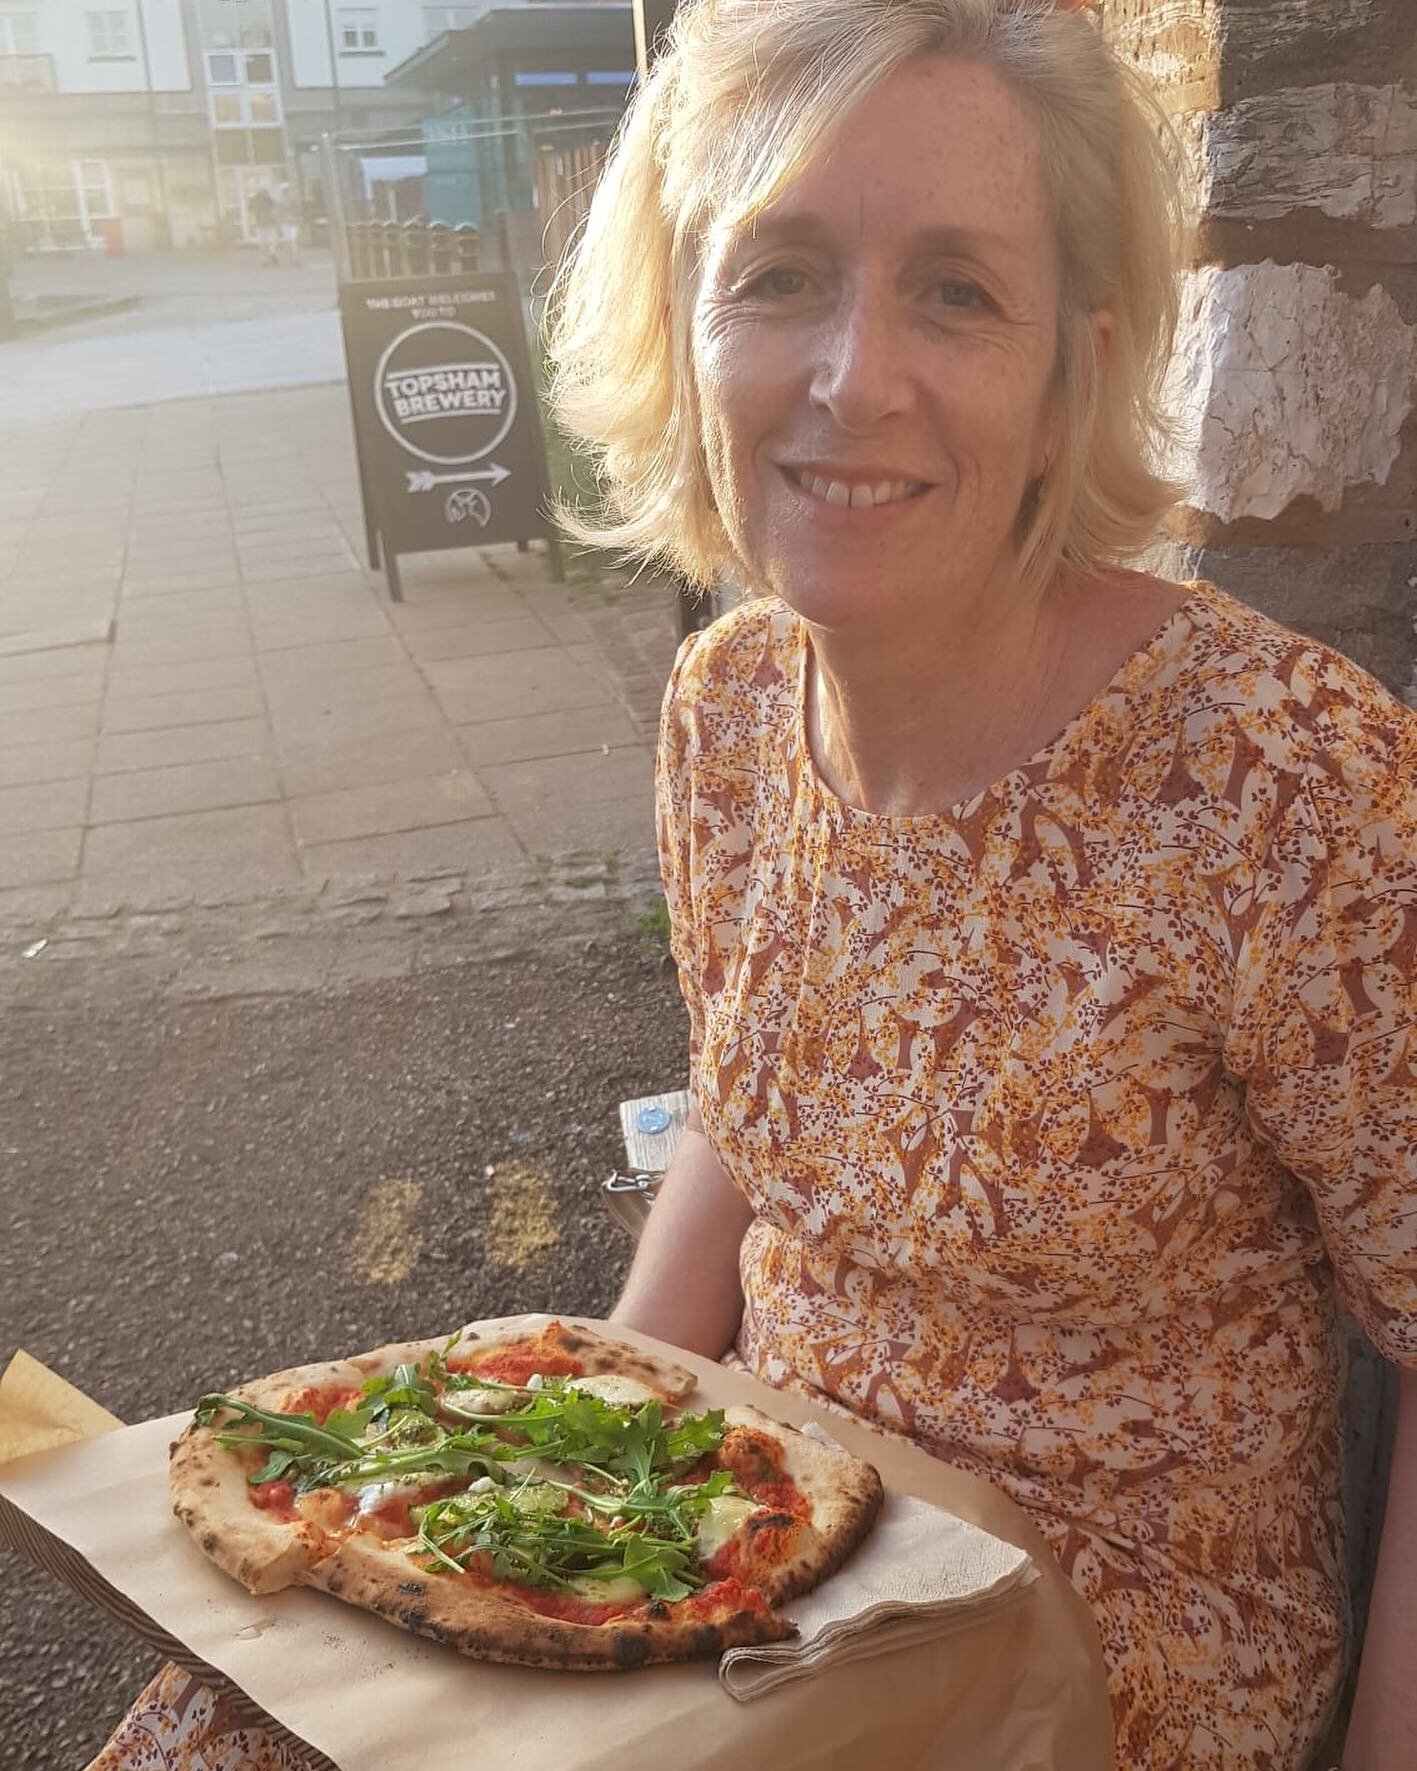 A perfect summer&rsquo;s evening @topshambrewery @portal_pizza_exeter A chilled drink &amp; pizza by the river while our sons were at their school leavers celebration #ale #wine #pizza #riversideeating #exeter #devon